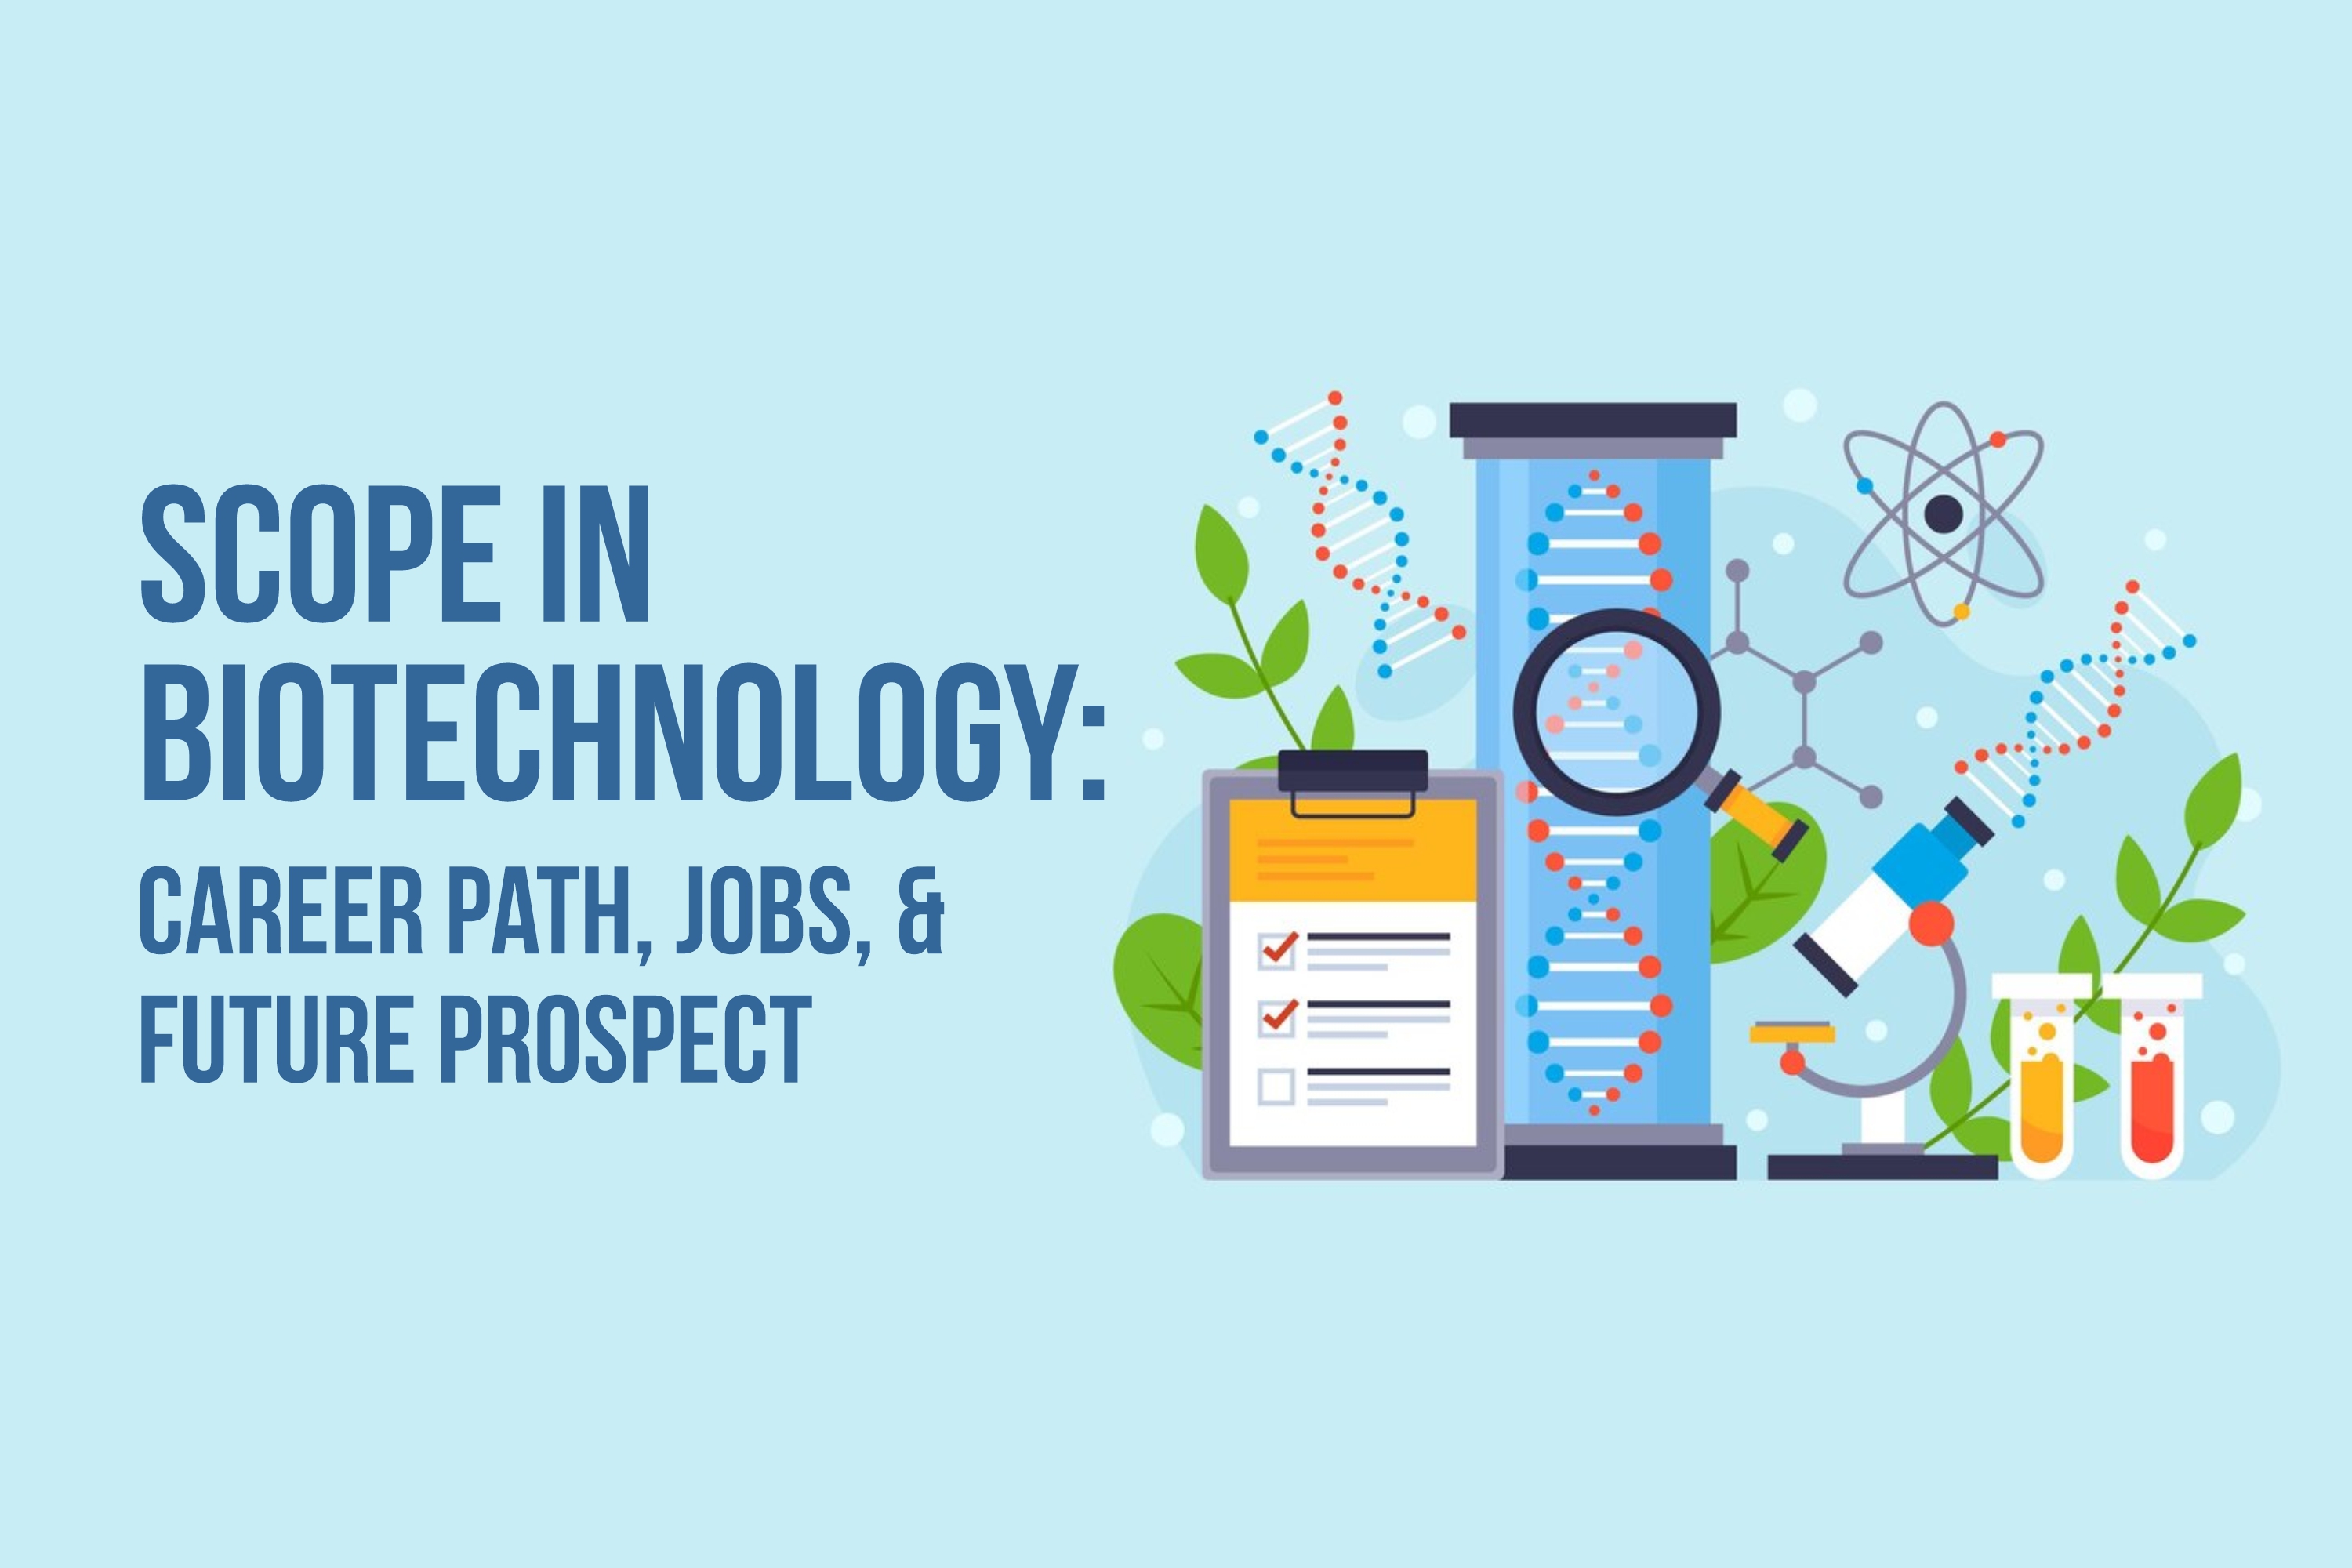 Scope in Biotechnology: Career Path, Jobs, & Future Prospect